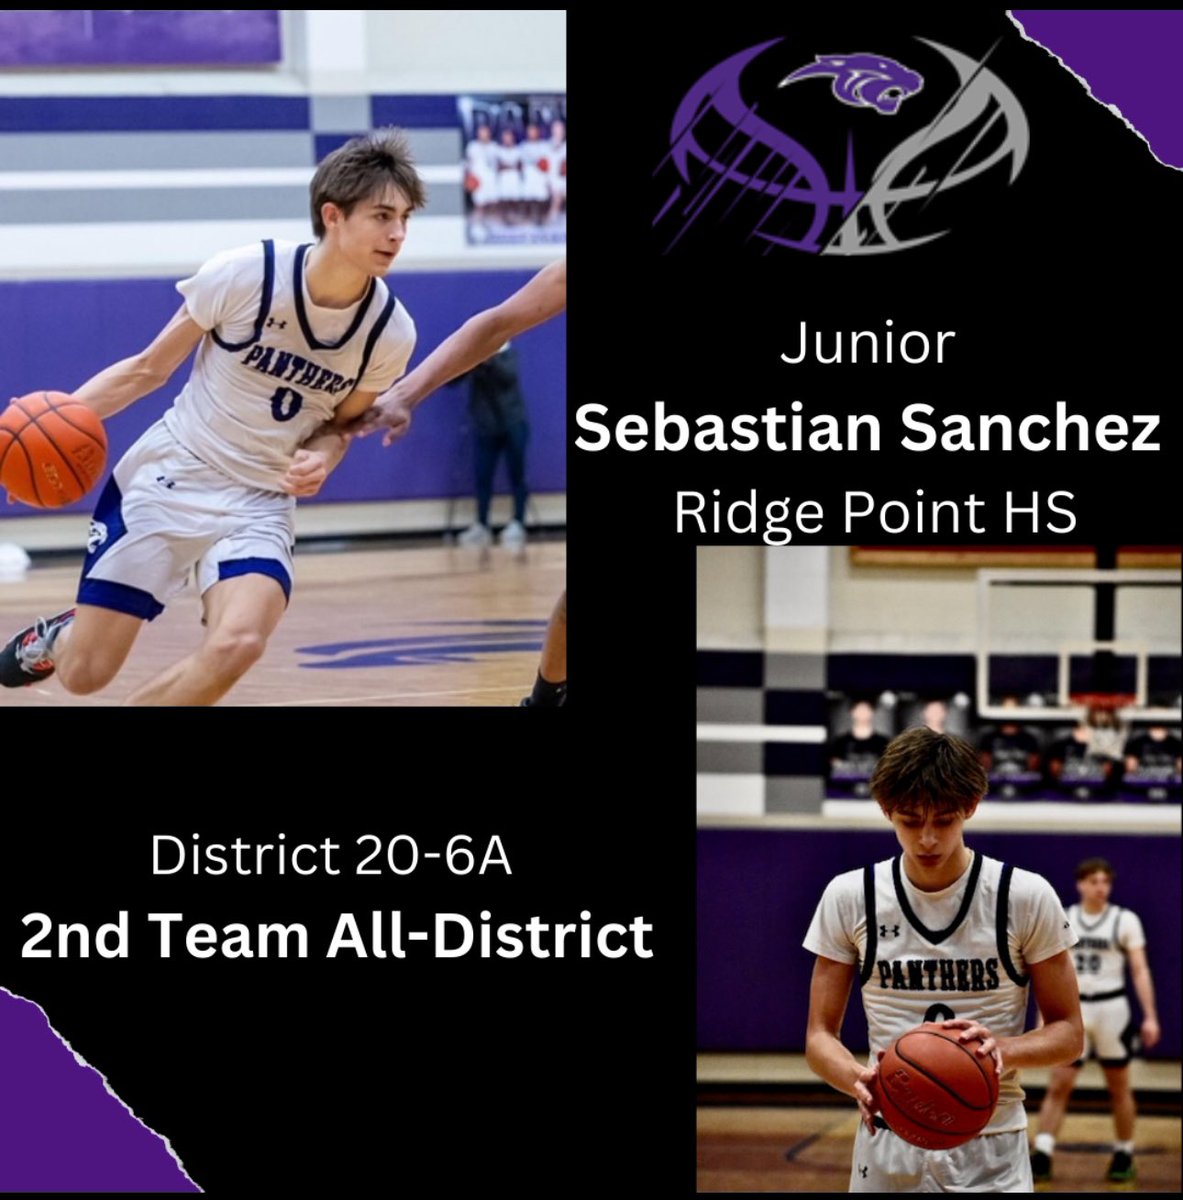 Congratulations @SebastianSan_0 on being named 2nd Team All-District. Great honor and well deserved. #Brotherhood #C>S #TGW